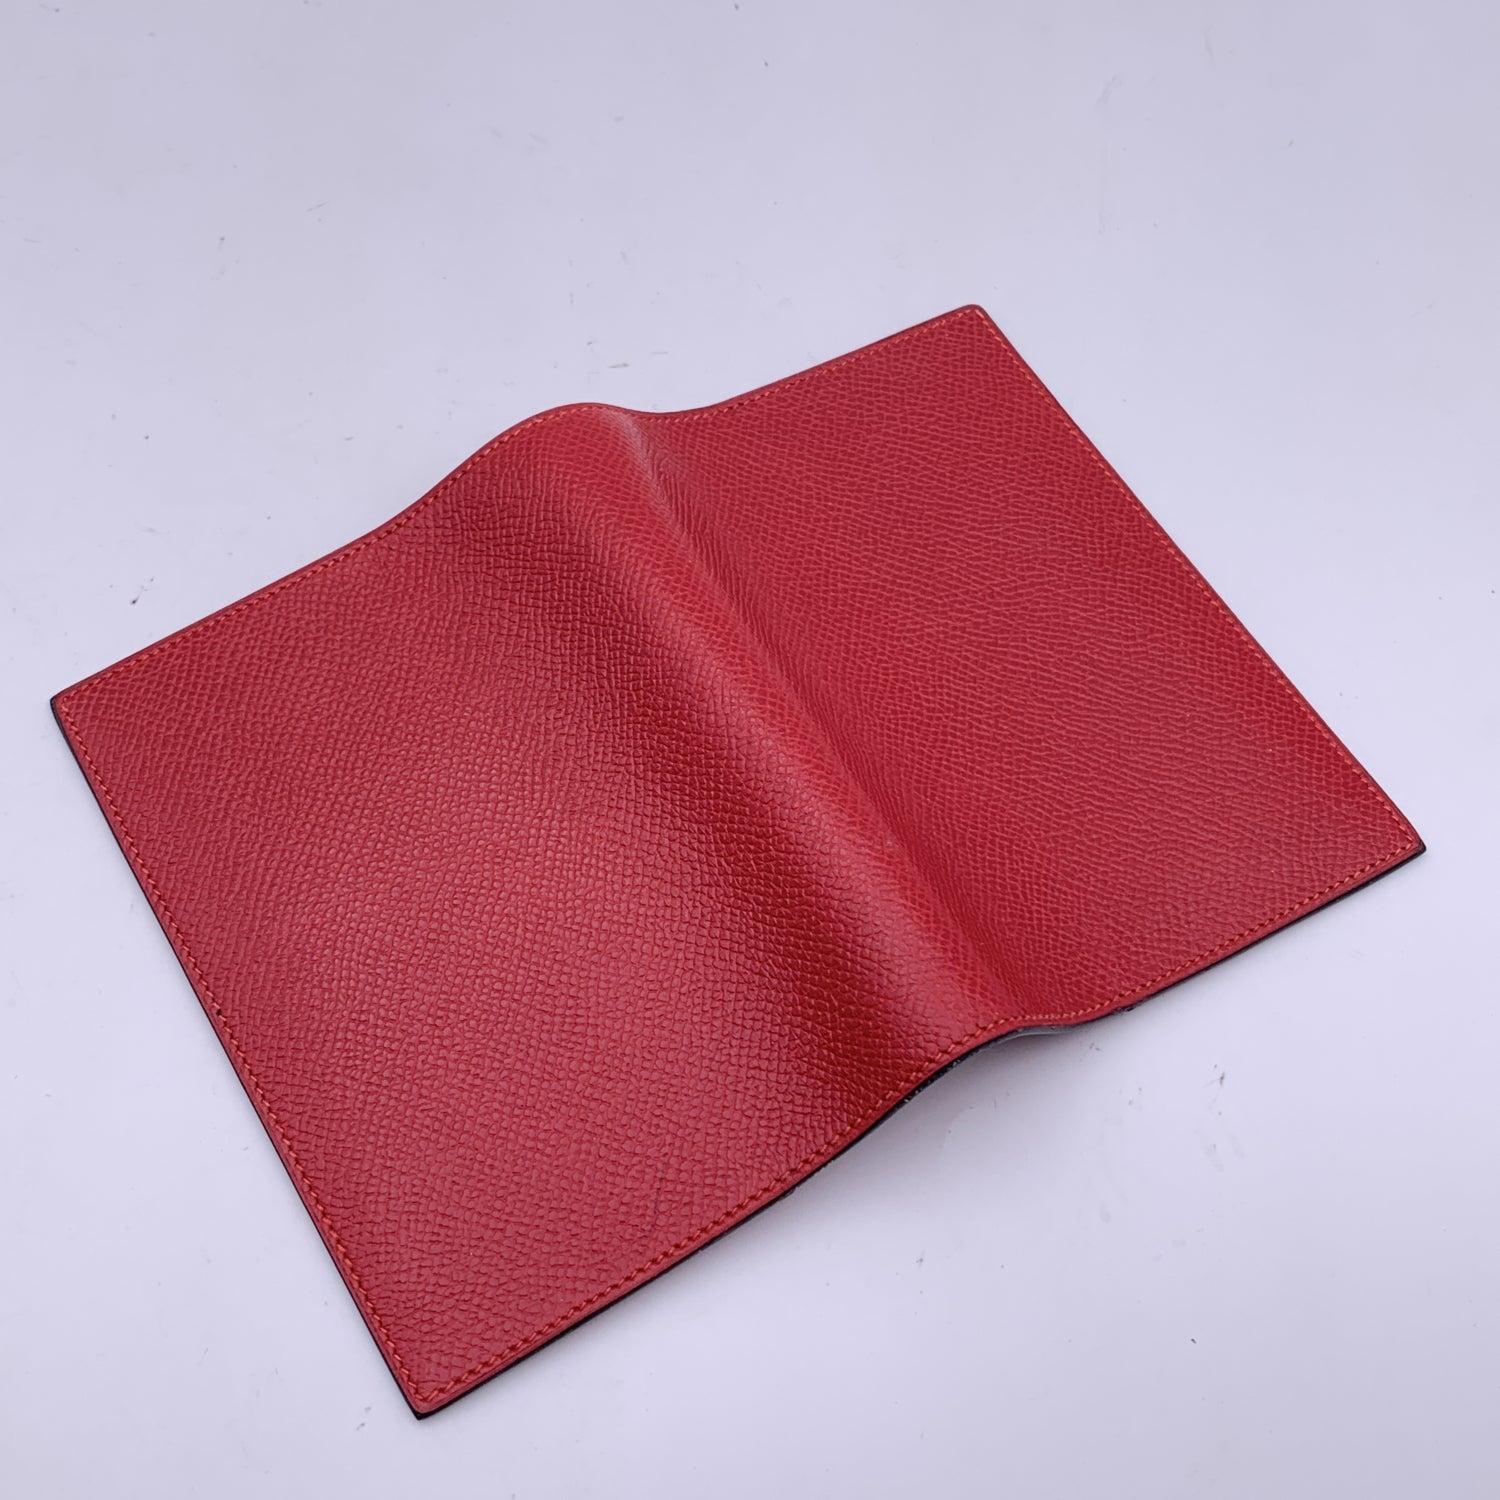 Hermes Vintage Red Leather Simple Agenda Notebook Cover 3